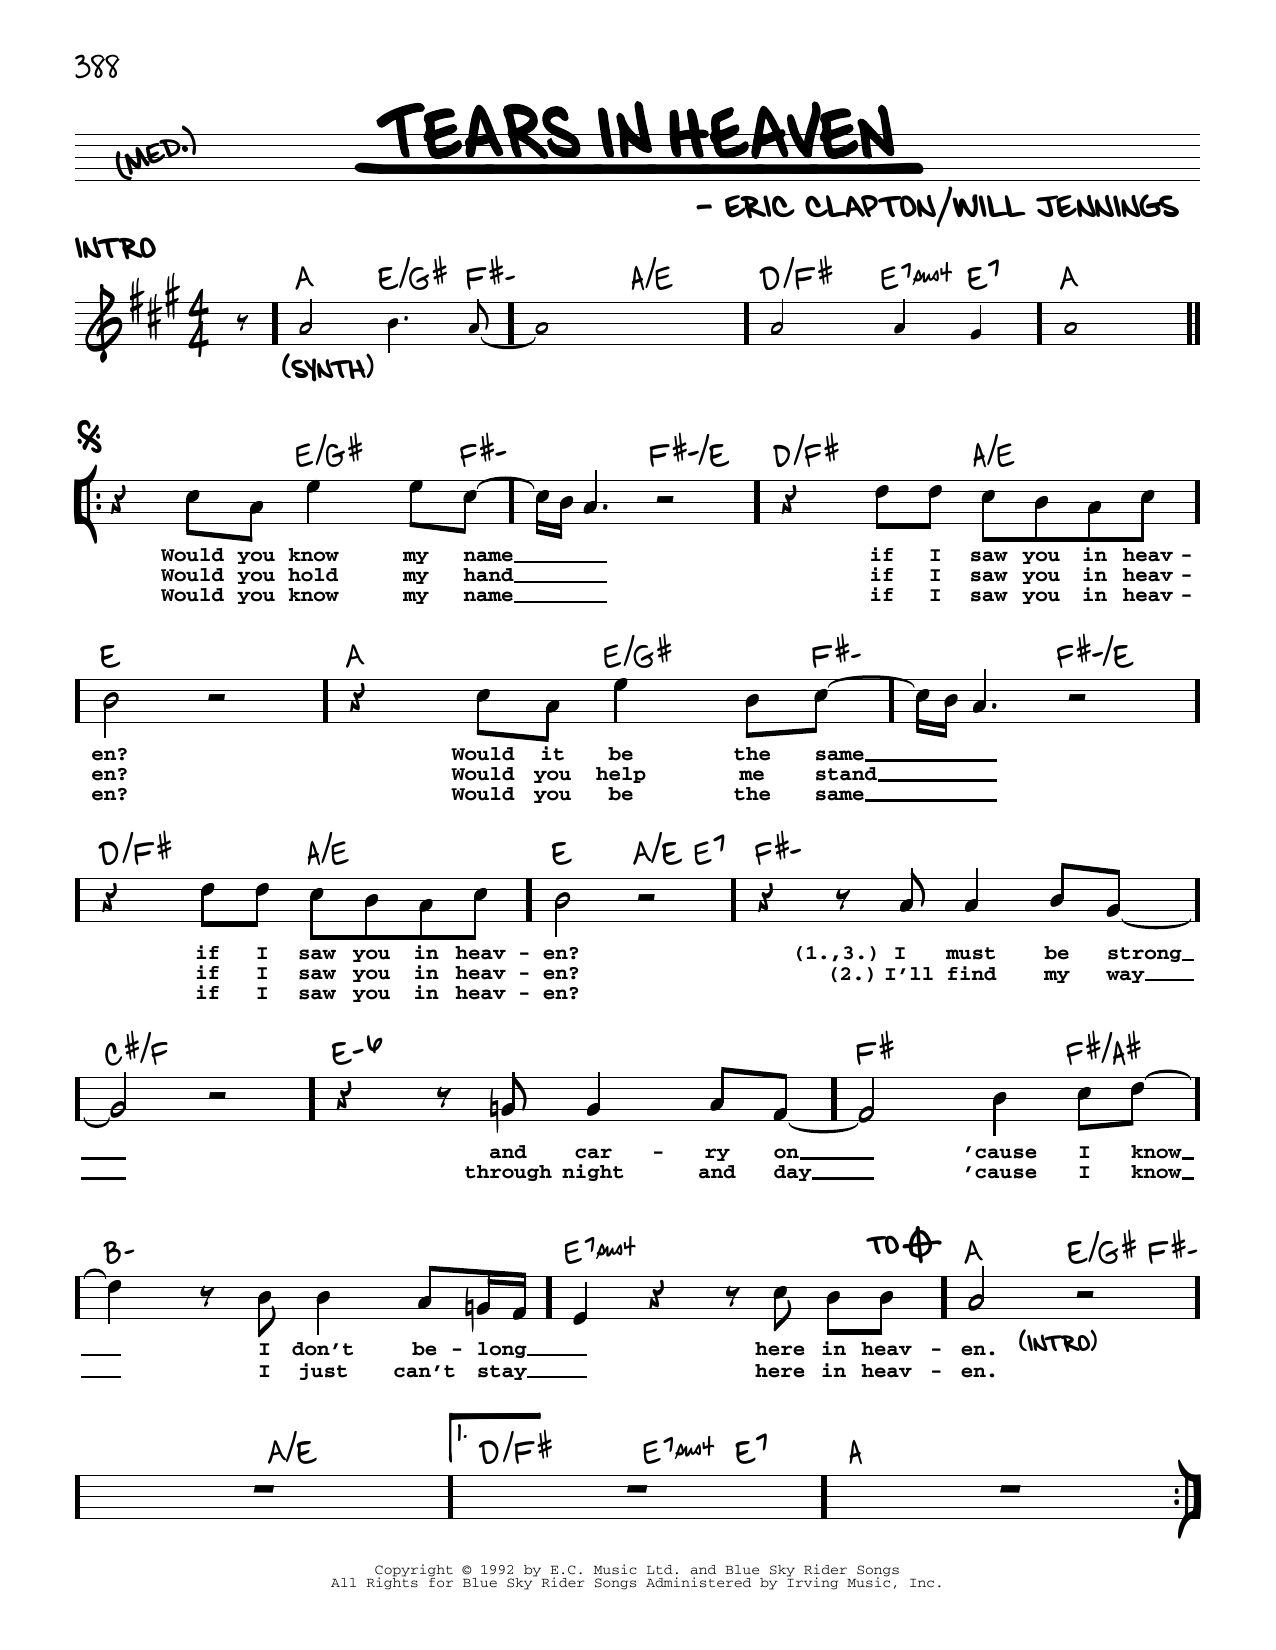 Pdf heaven tears and in lyrics chords Eric Clapton